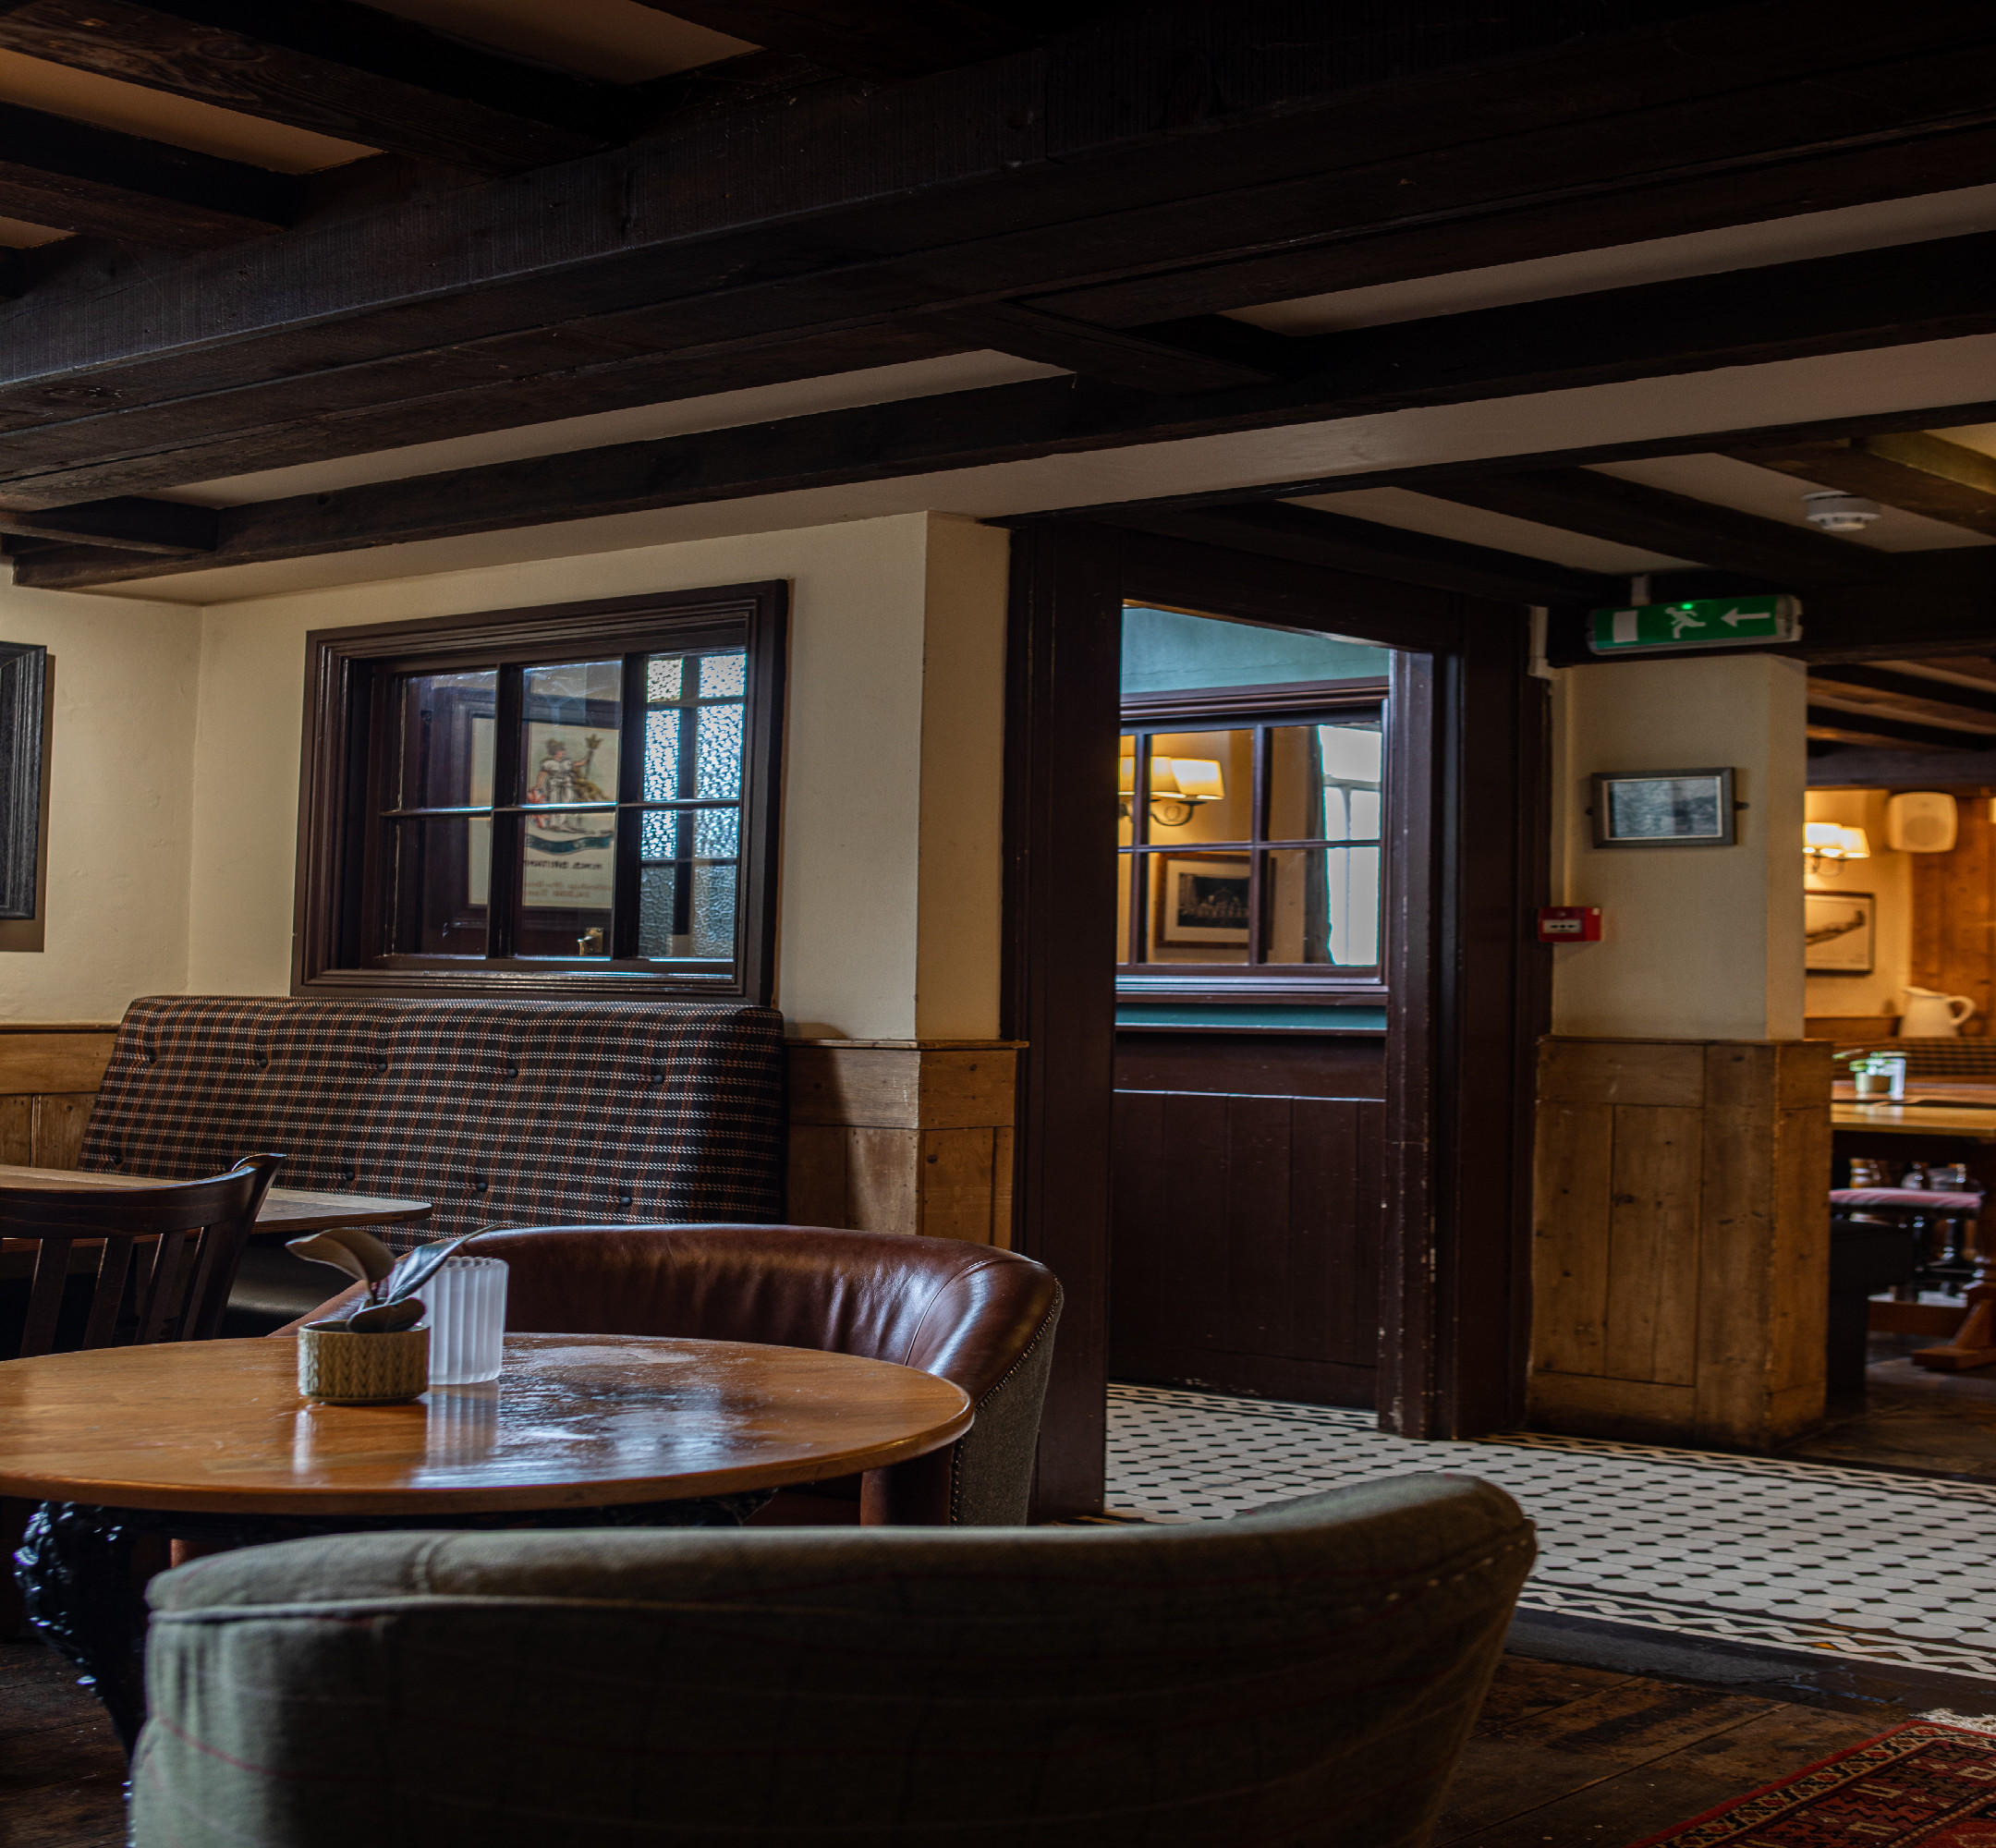 Images The Three Tuns